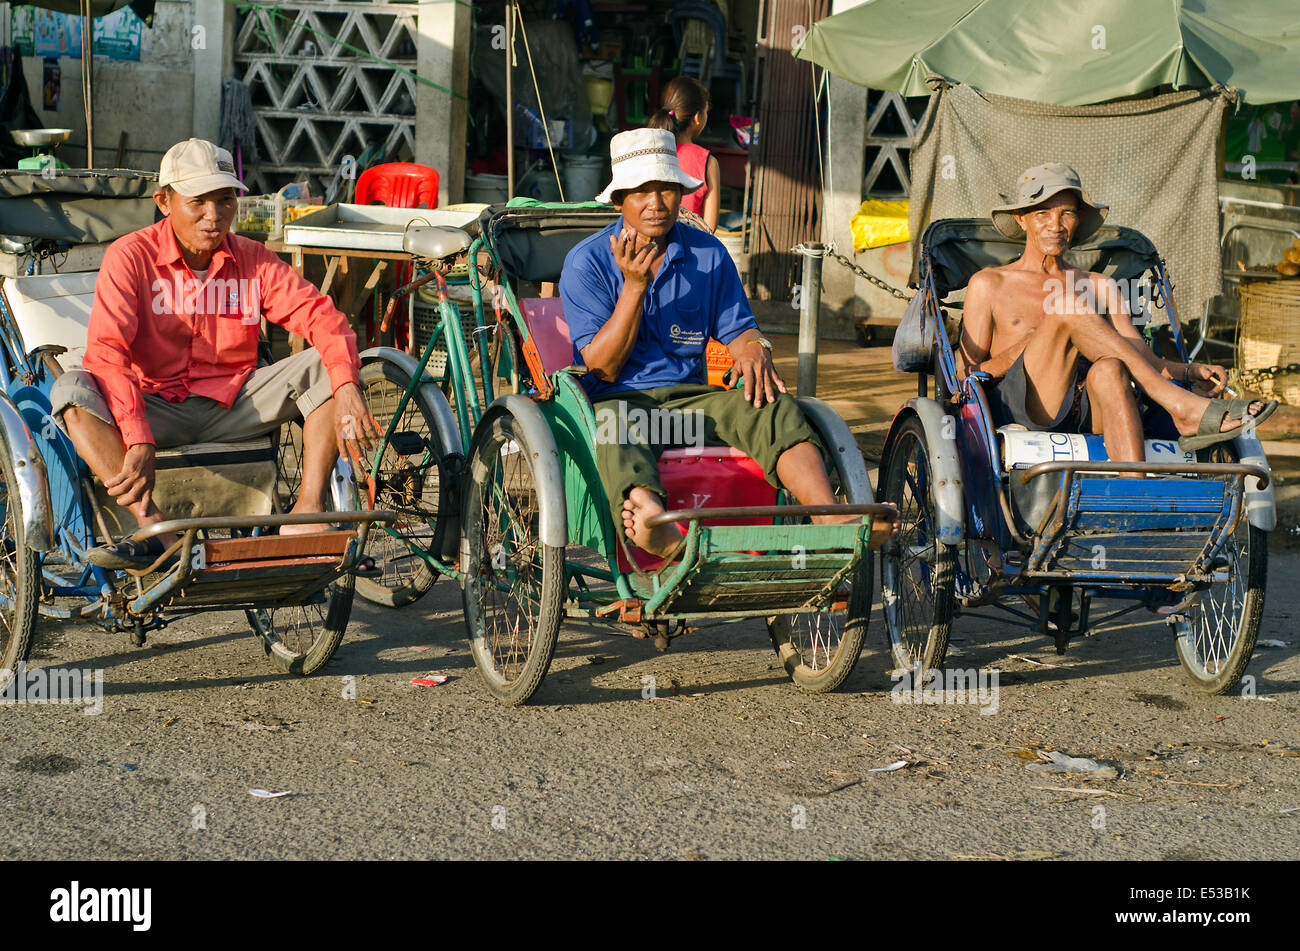 Cyclo man waiting for customers on the Old market, Phnom Penh Stock Photo